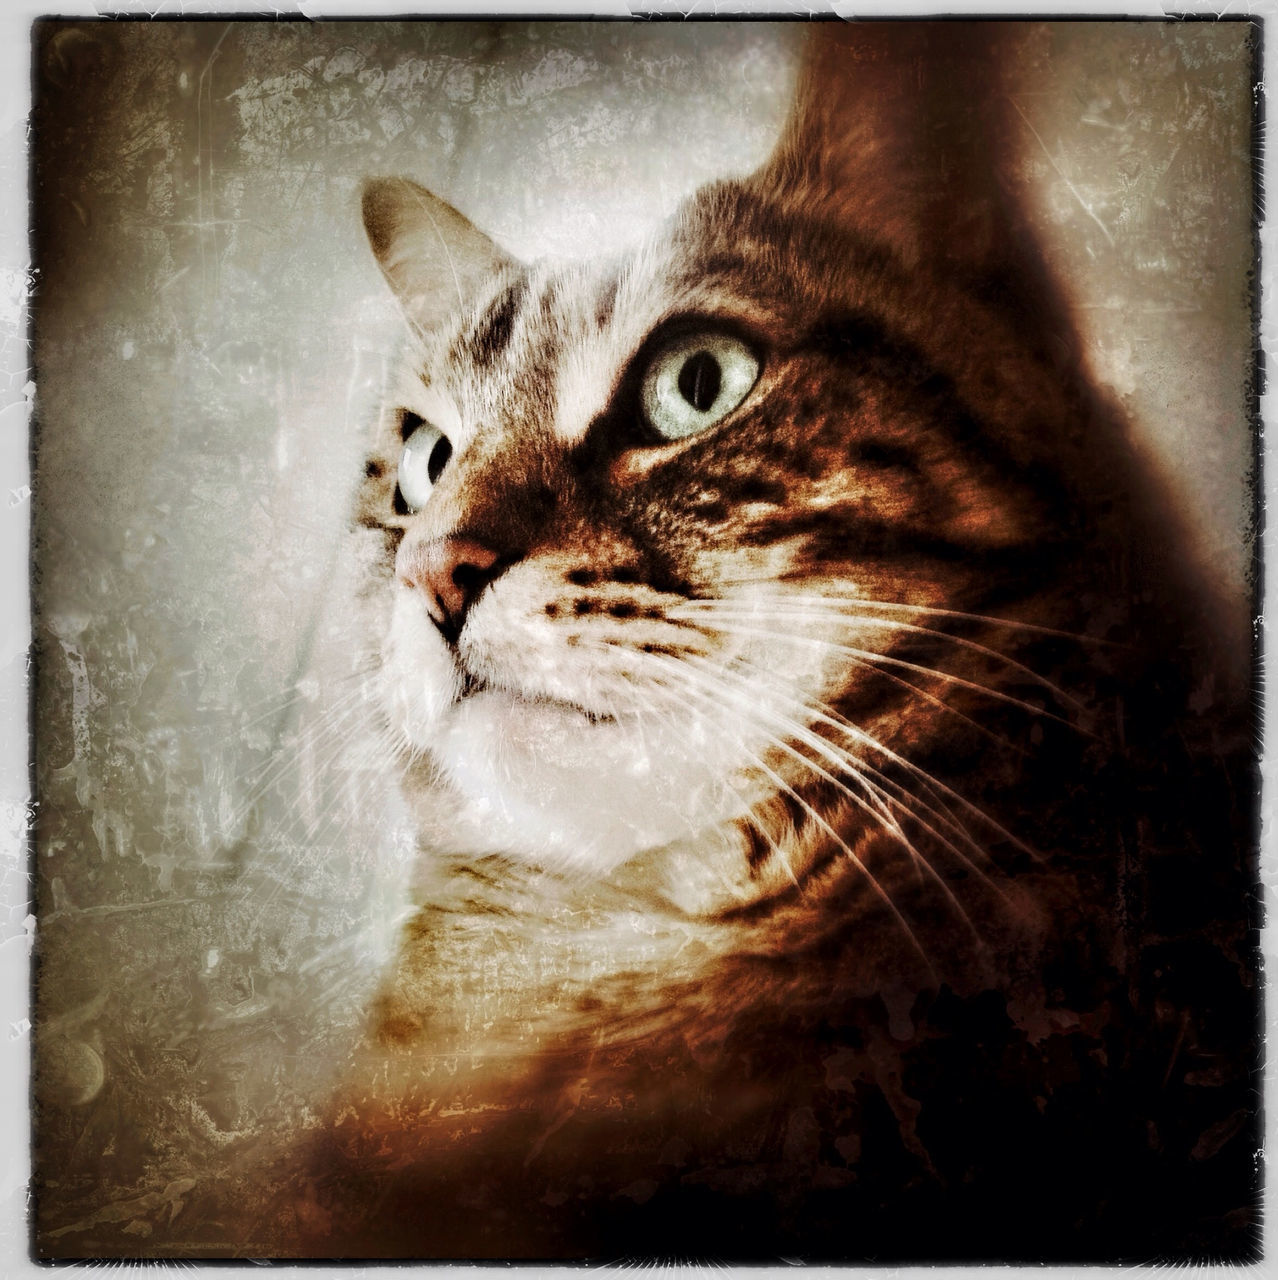 transfer print, one animal, animal themes, auto post production filter, domestic cat, pets, cat, domestic animals, indoors, feline, close-up, portrait, whisker, looking at camera, mammal, animal head, staring, no people, high angle view, alertness